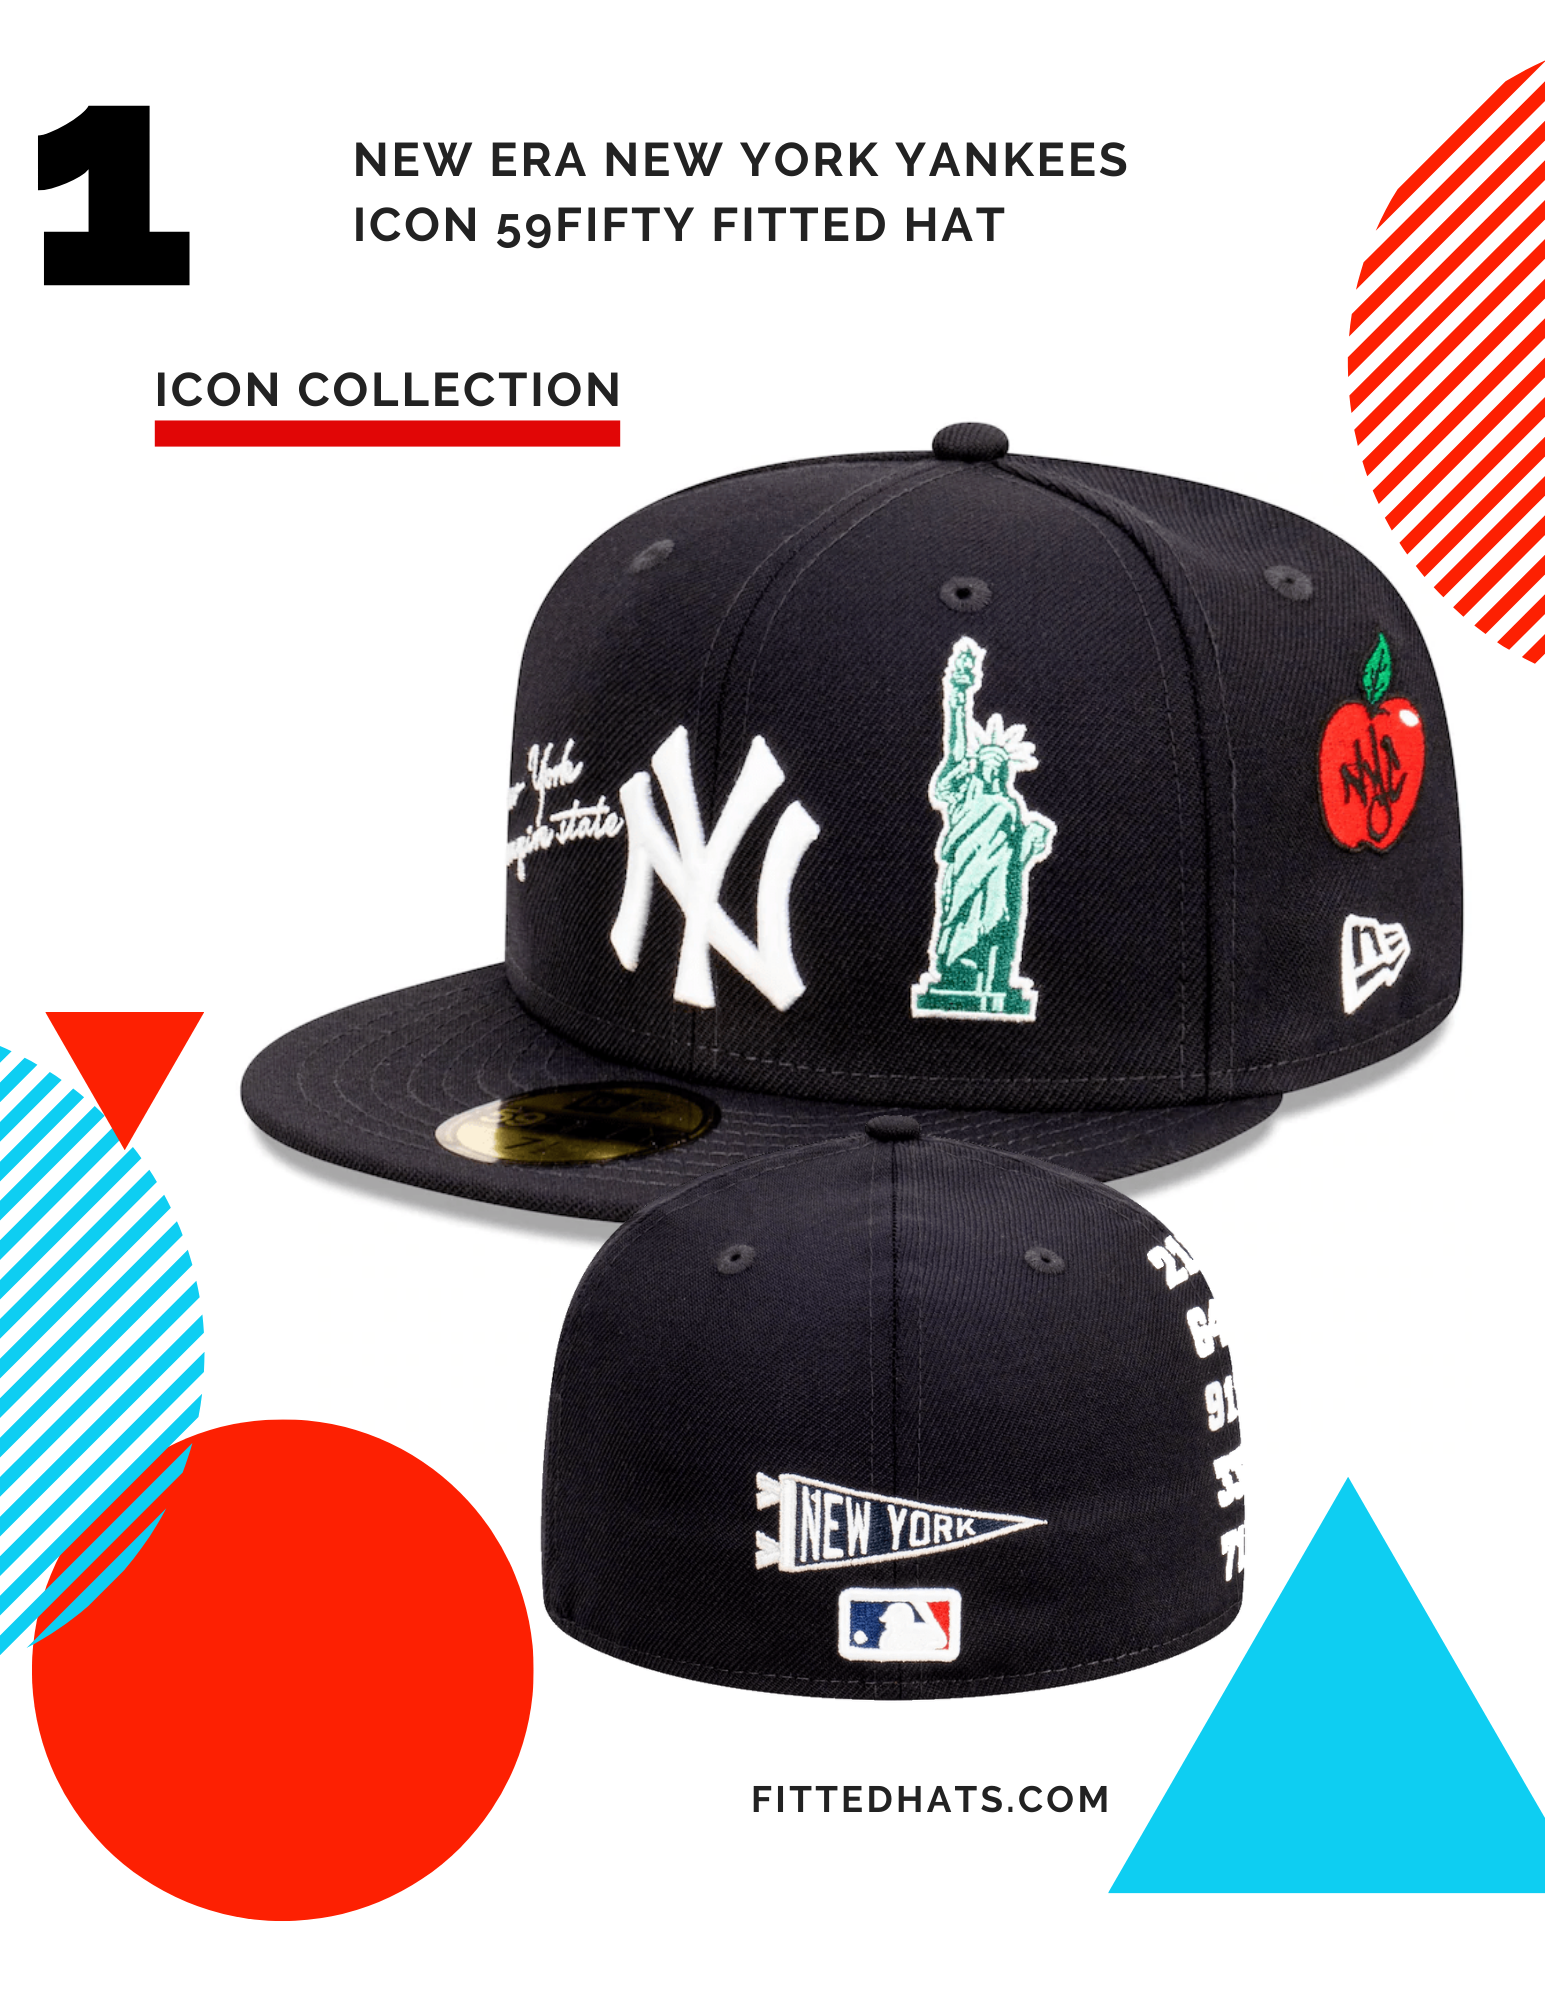 New York Yankees Icon Liberty Fitted Hat